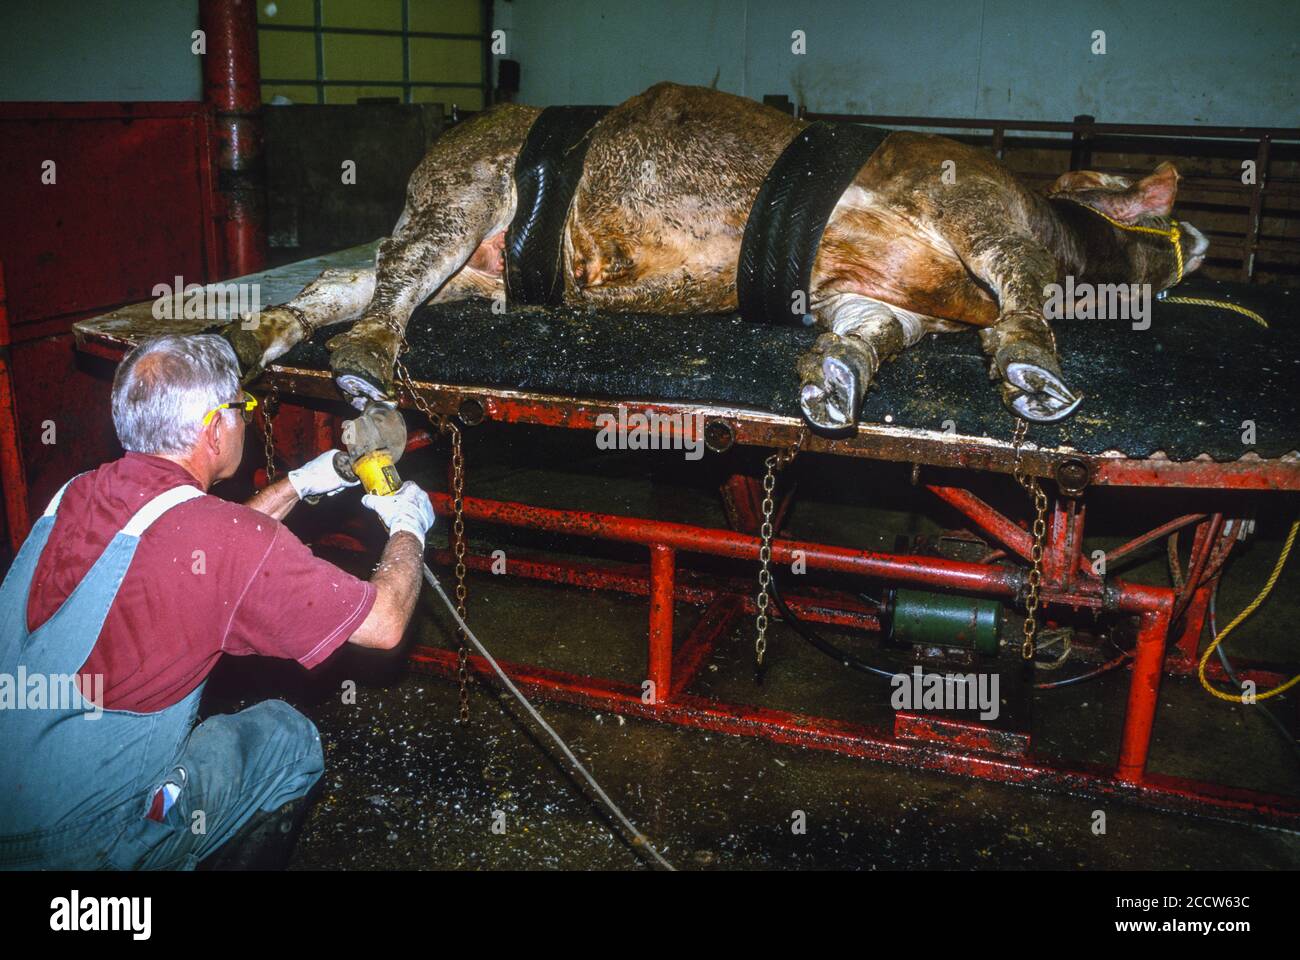 Large-animal Veterinarian at Work:  Trimming Hooves, Cow on Operating Table.  Dyersville, Iowa, USA. MR. Stock Photo